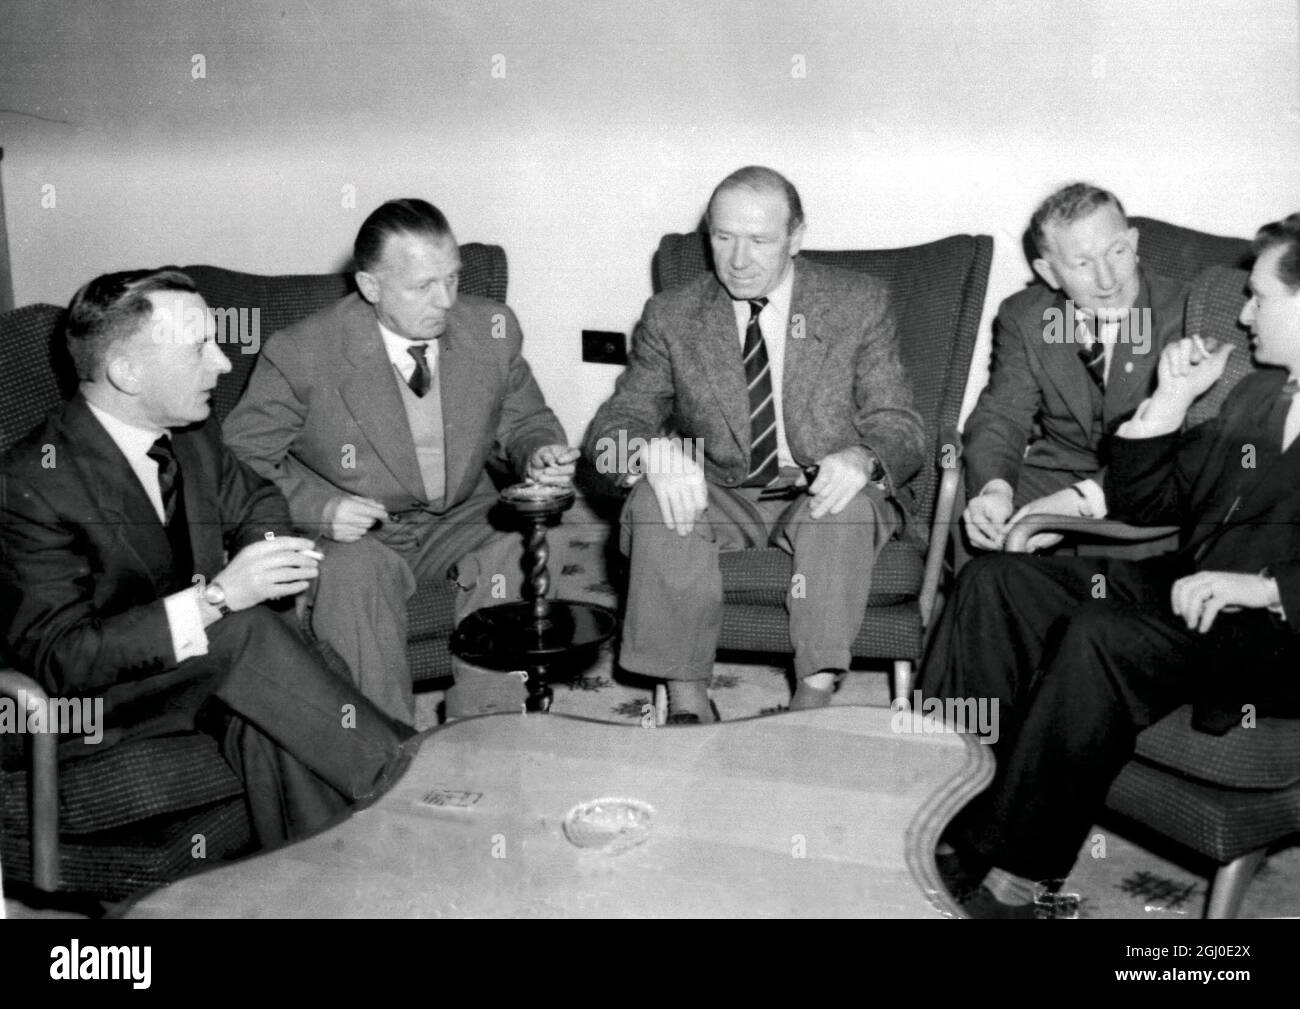 Officials of the Manchester United football team and of the Czechoslovak Army team, Dukla Prague sit around the table to arrange a new date for their cup tie match in the European Cup after the original match had been cancelled after the death of the president of Czechoslovakia. At the table are left to right: Mr W Crickmer, Manchester Utd secretary, Lt. Col.Bayer, president of the Dukla club, Matt Busby, Manager of Manchester Utd, Mr B.Whalley the Manchester Utd coach, and Mr V Peck an interpreter. Manchester - 13th November 1957. Stock Photo